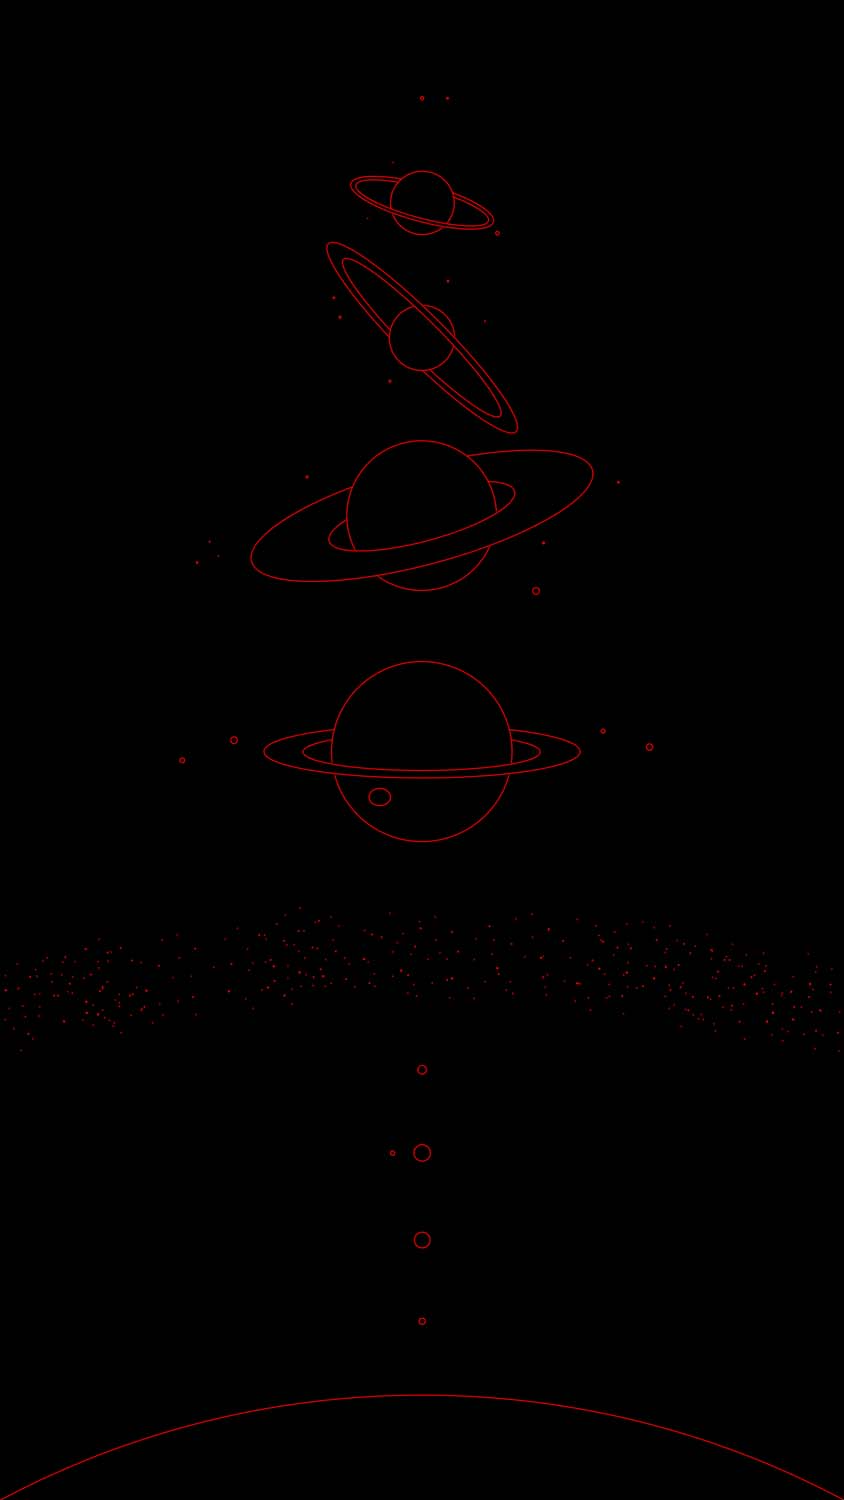 Planets Moons Scaled Sizes Dark Mode IPhone Wallpaper HD  IPhone Wallpapers